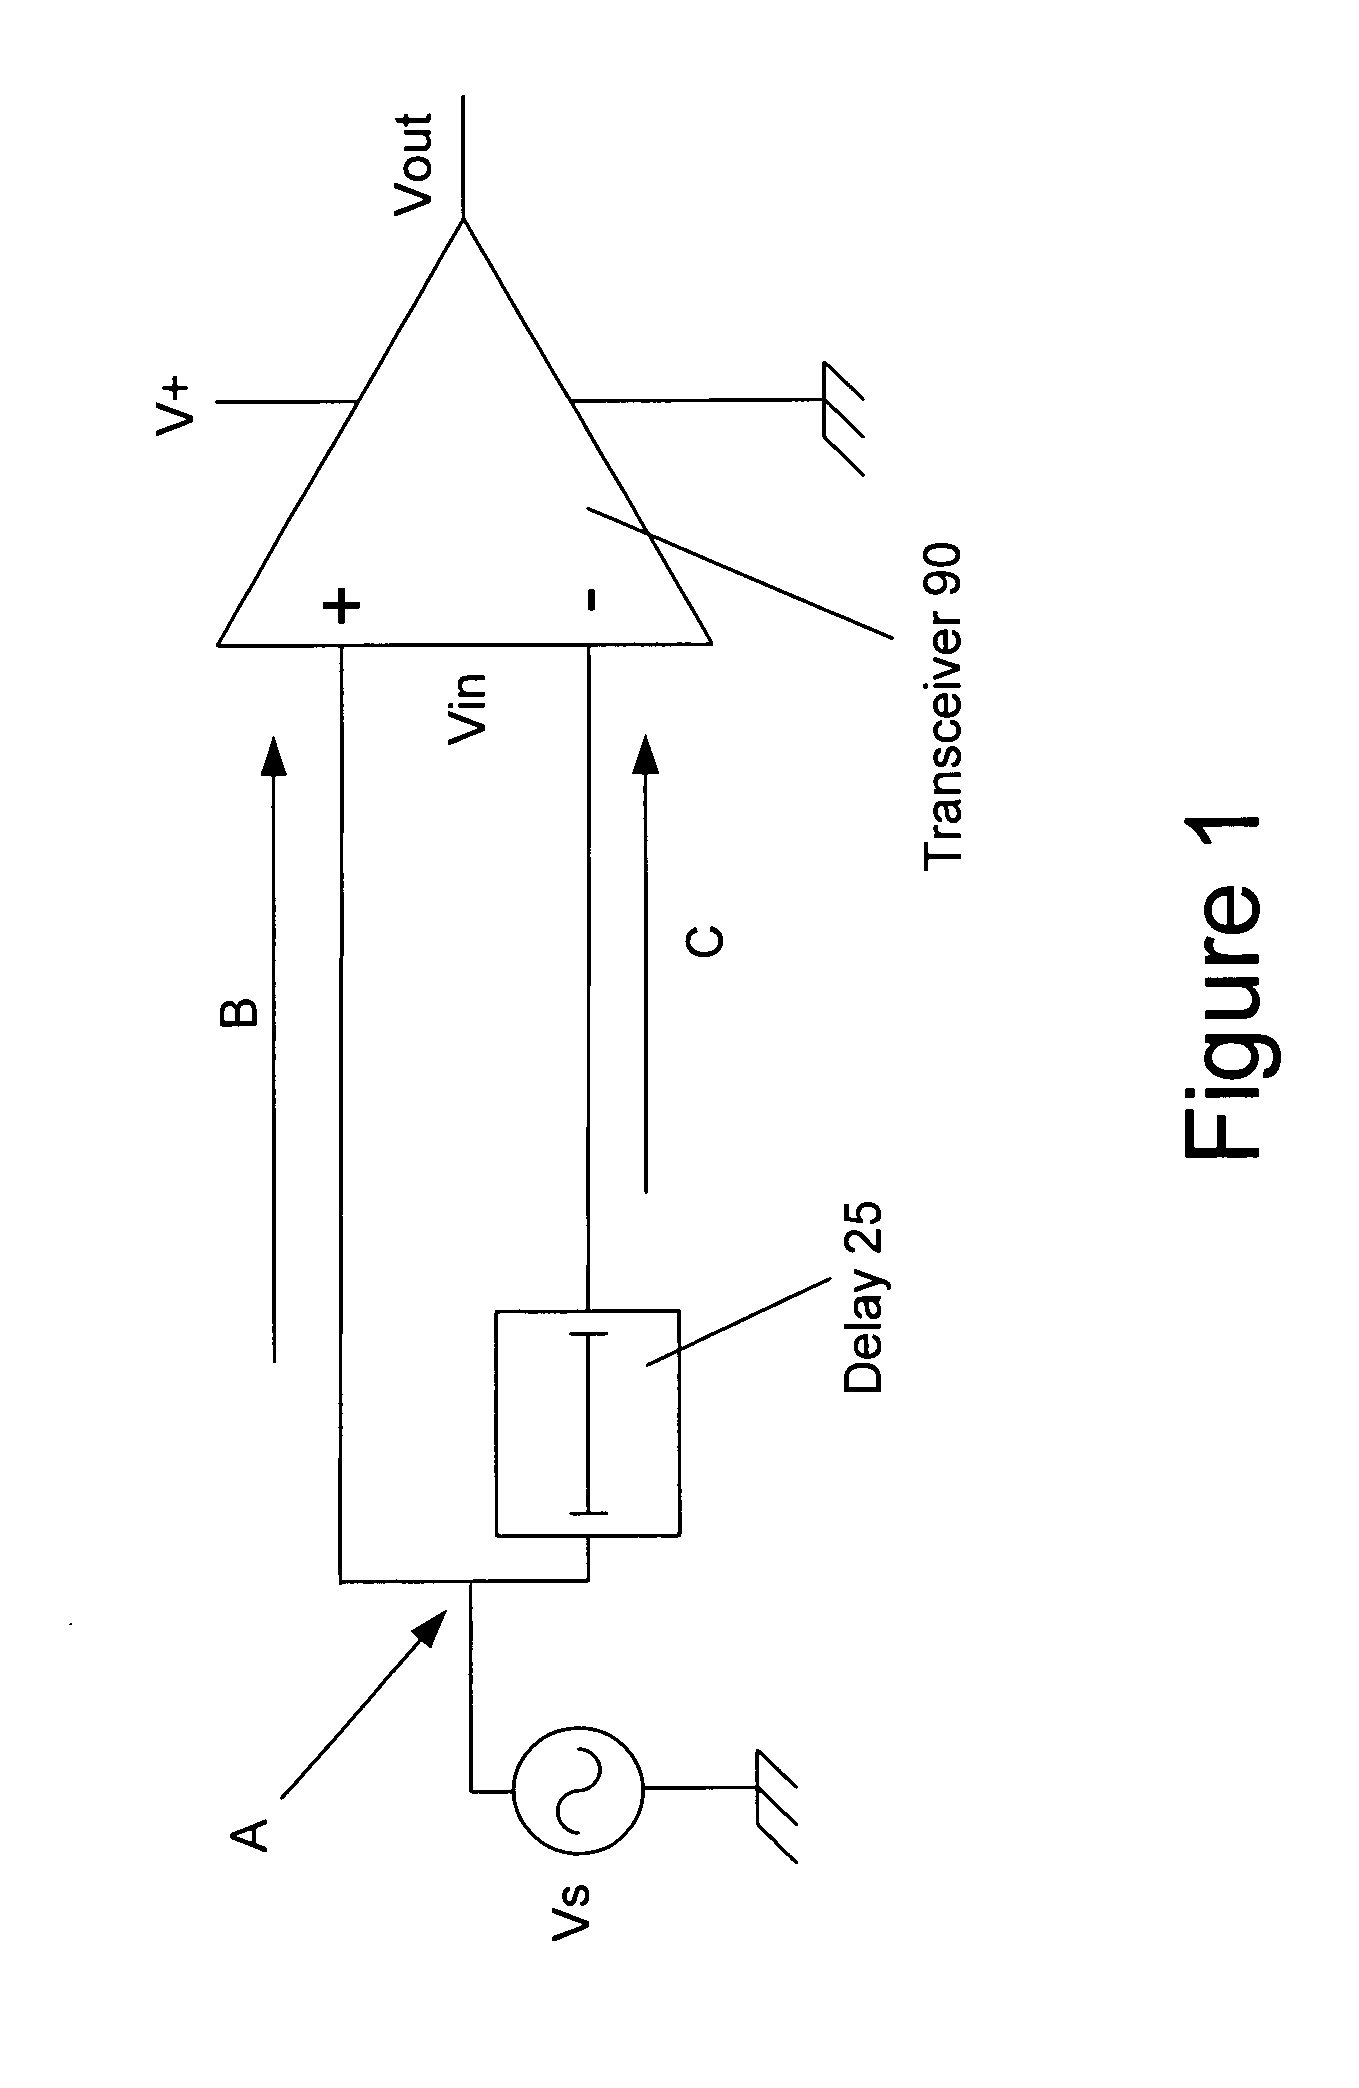 Power line coupling device and method of use